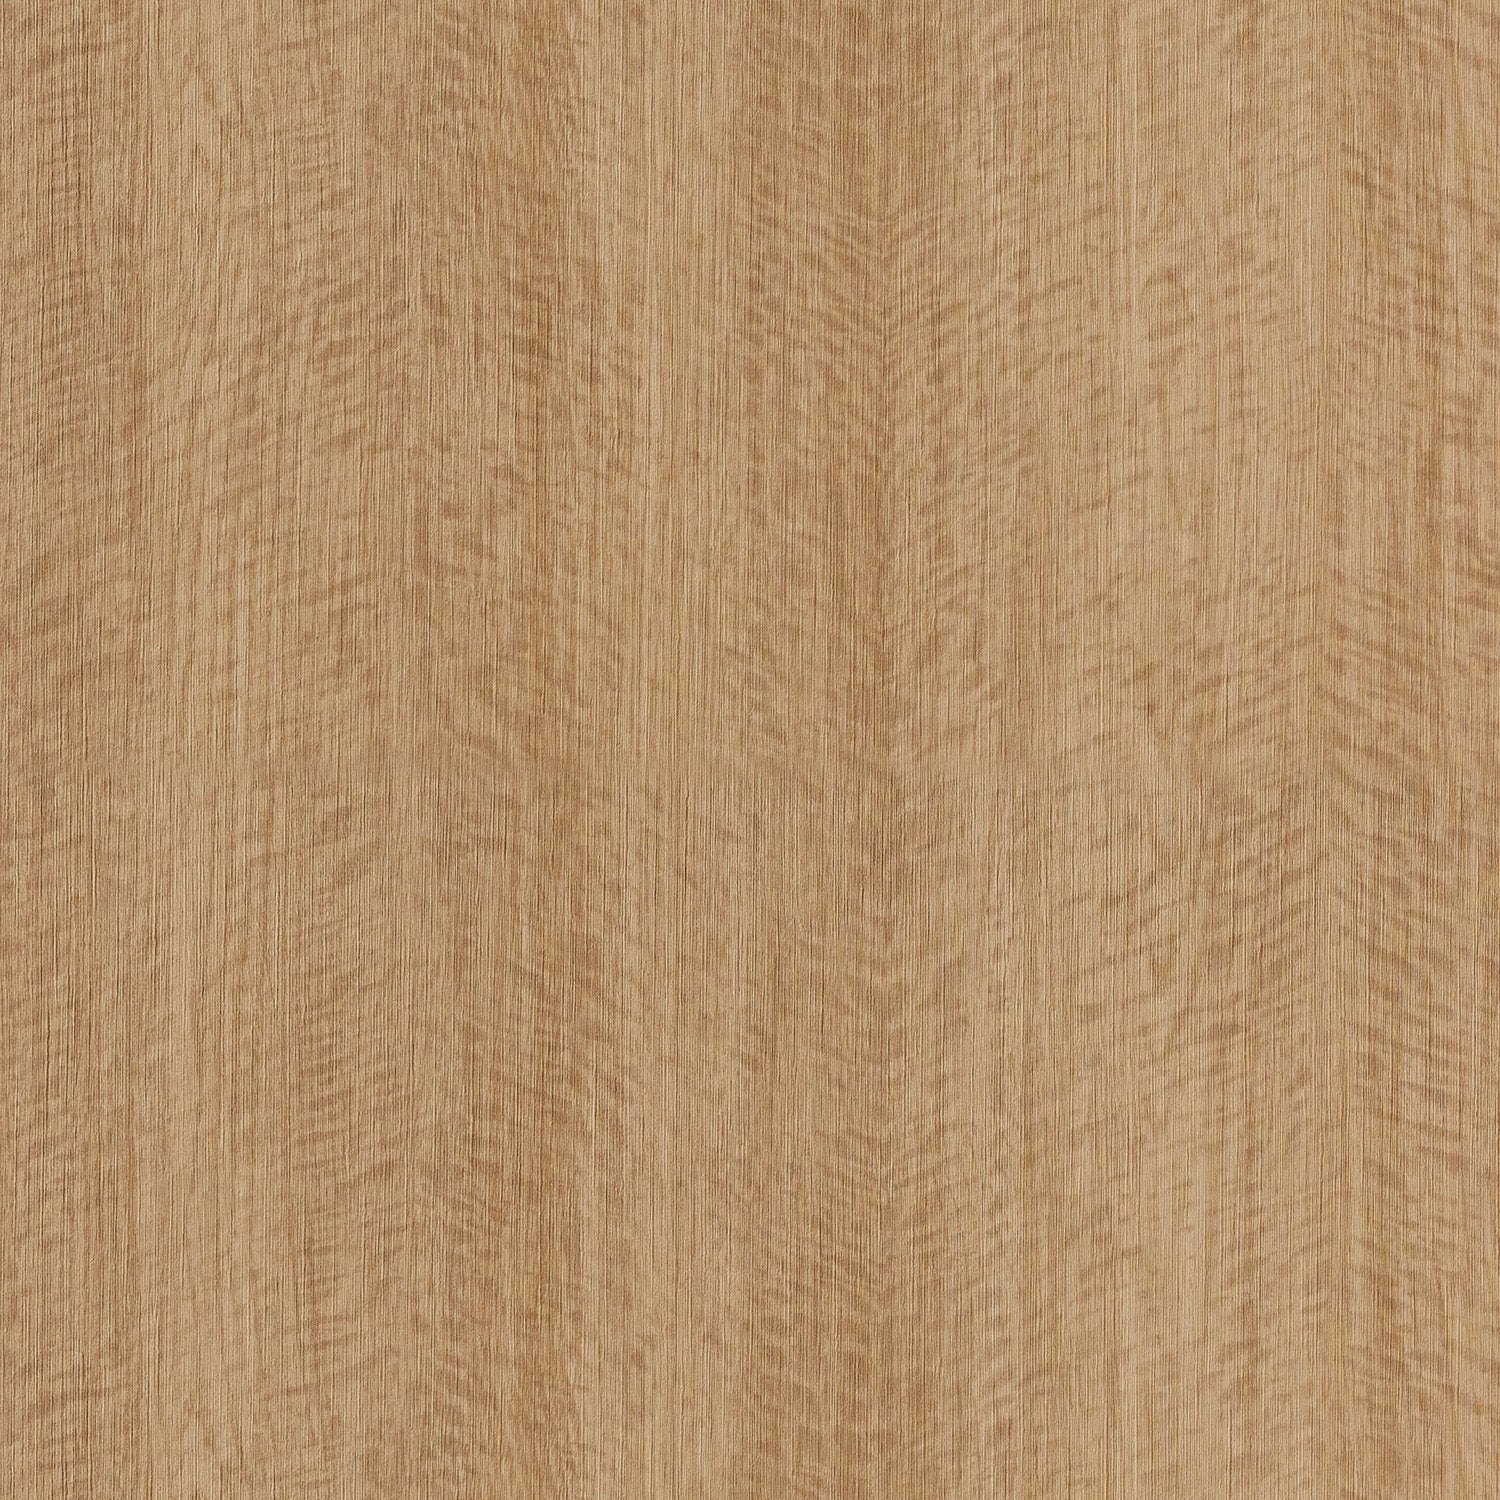 Woodn't It Be Nice - Y47883 - Wallcovering - Vycon - Kube Contract